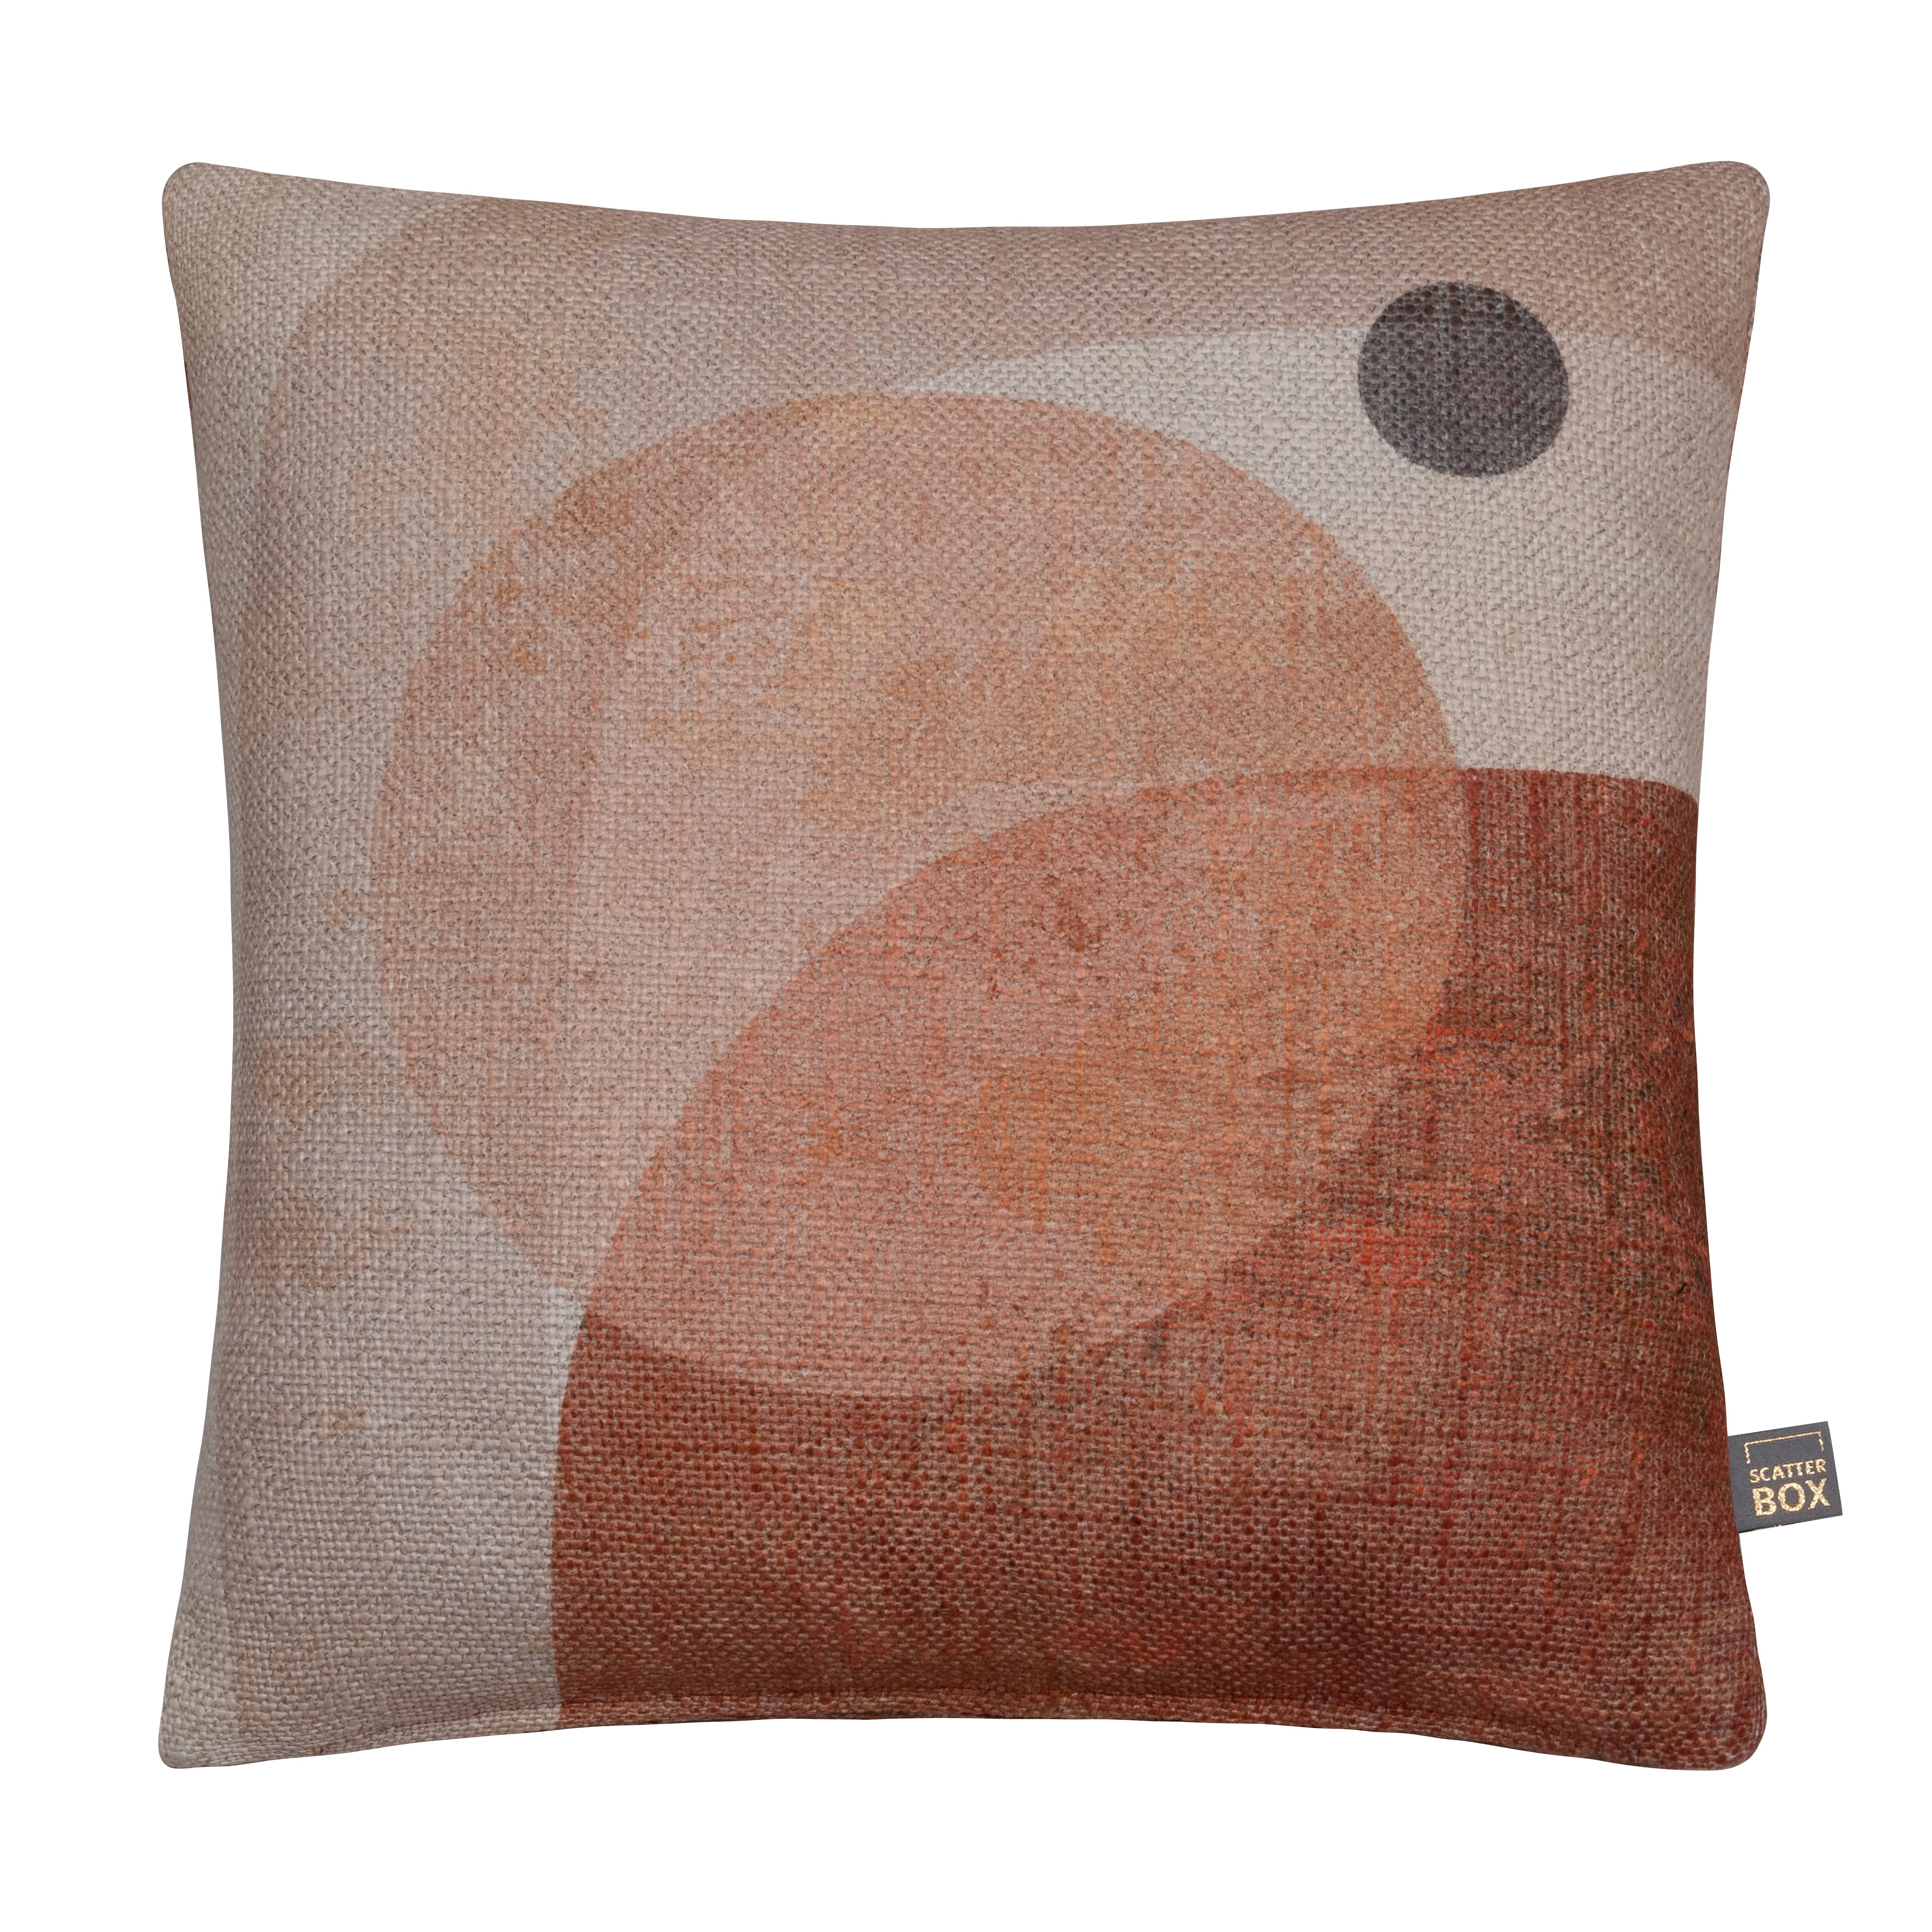 Abstract Sunrise Cushion, Square, Neutral - Barker & Stonehouse - image 1